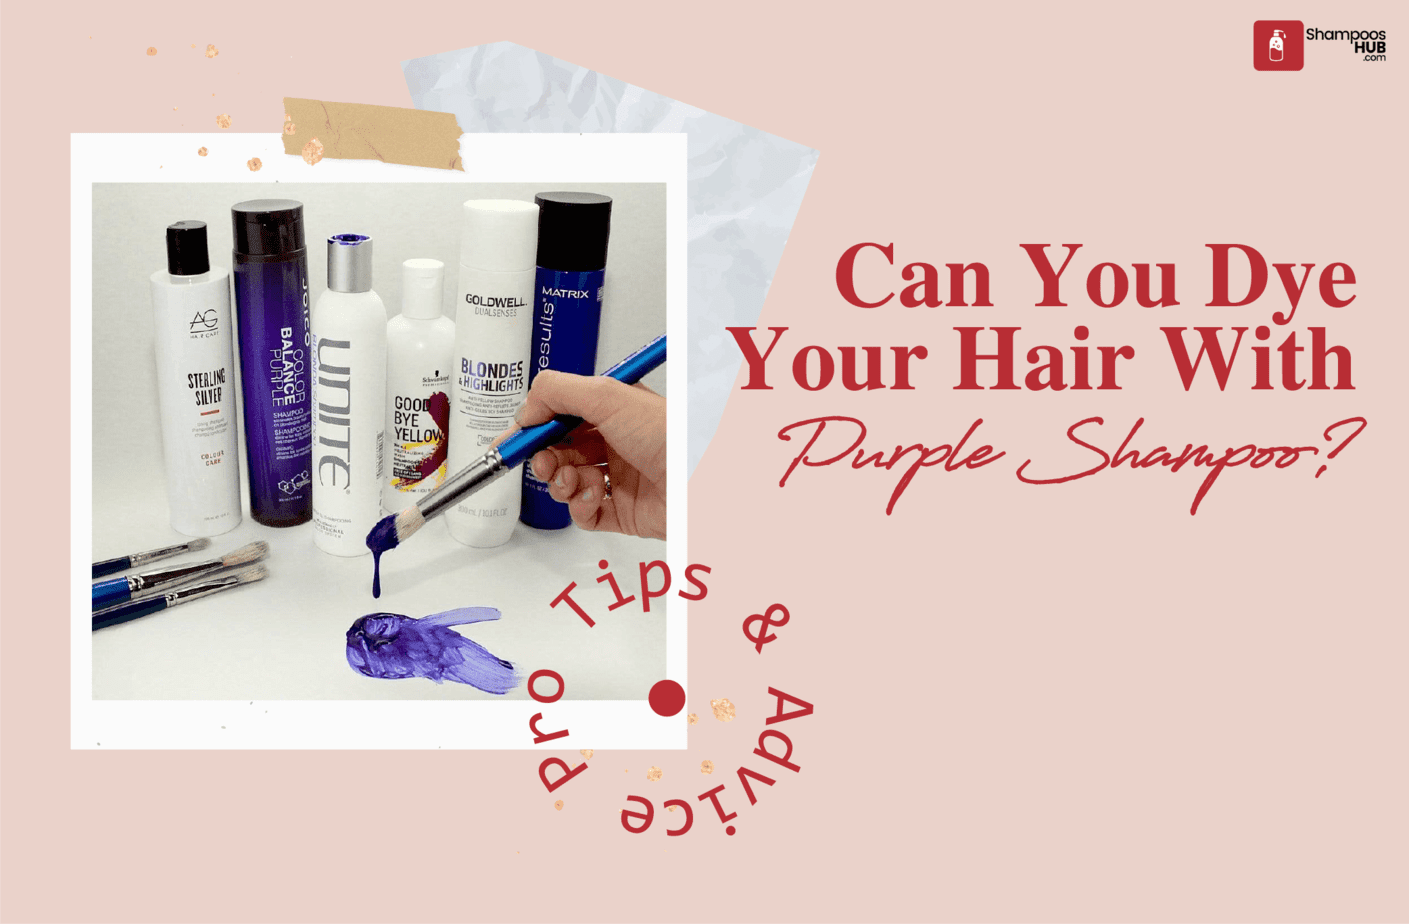 Can You Dye Your Hair With Purple Shampoo?